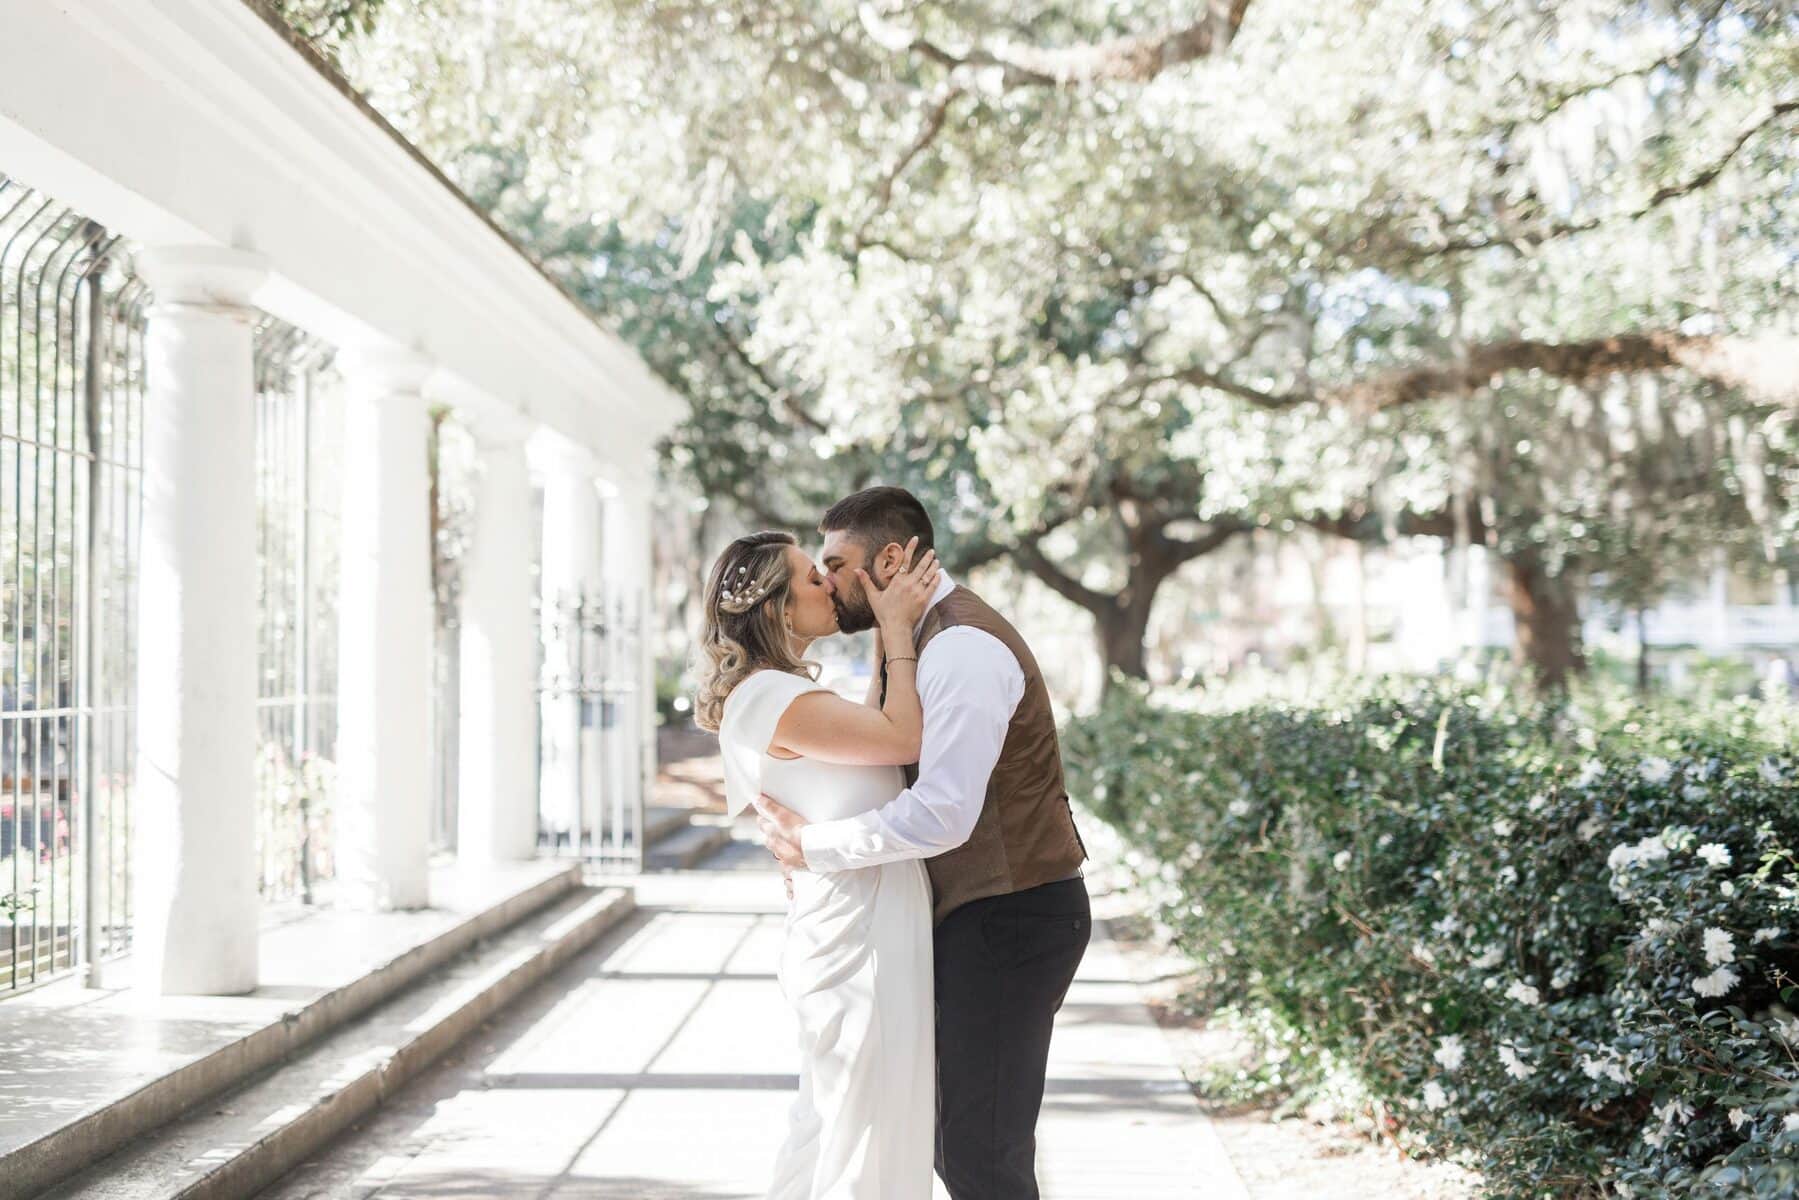 Apply for One of Our Wedding Positions in Savannah, Hilton Head or Atlanta!